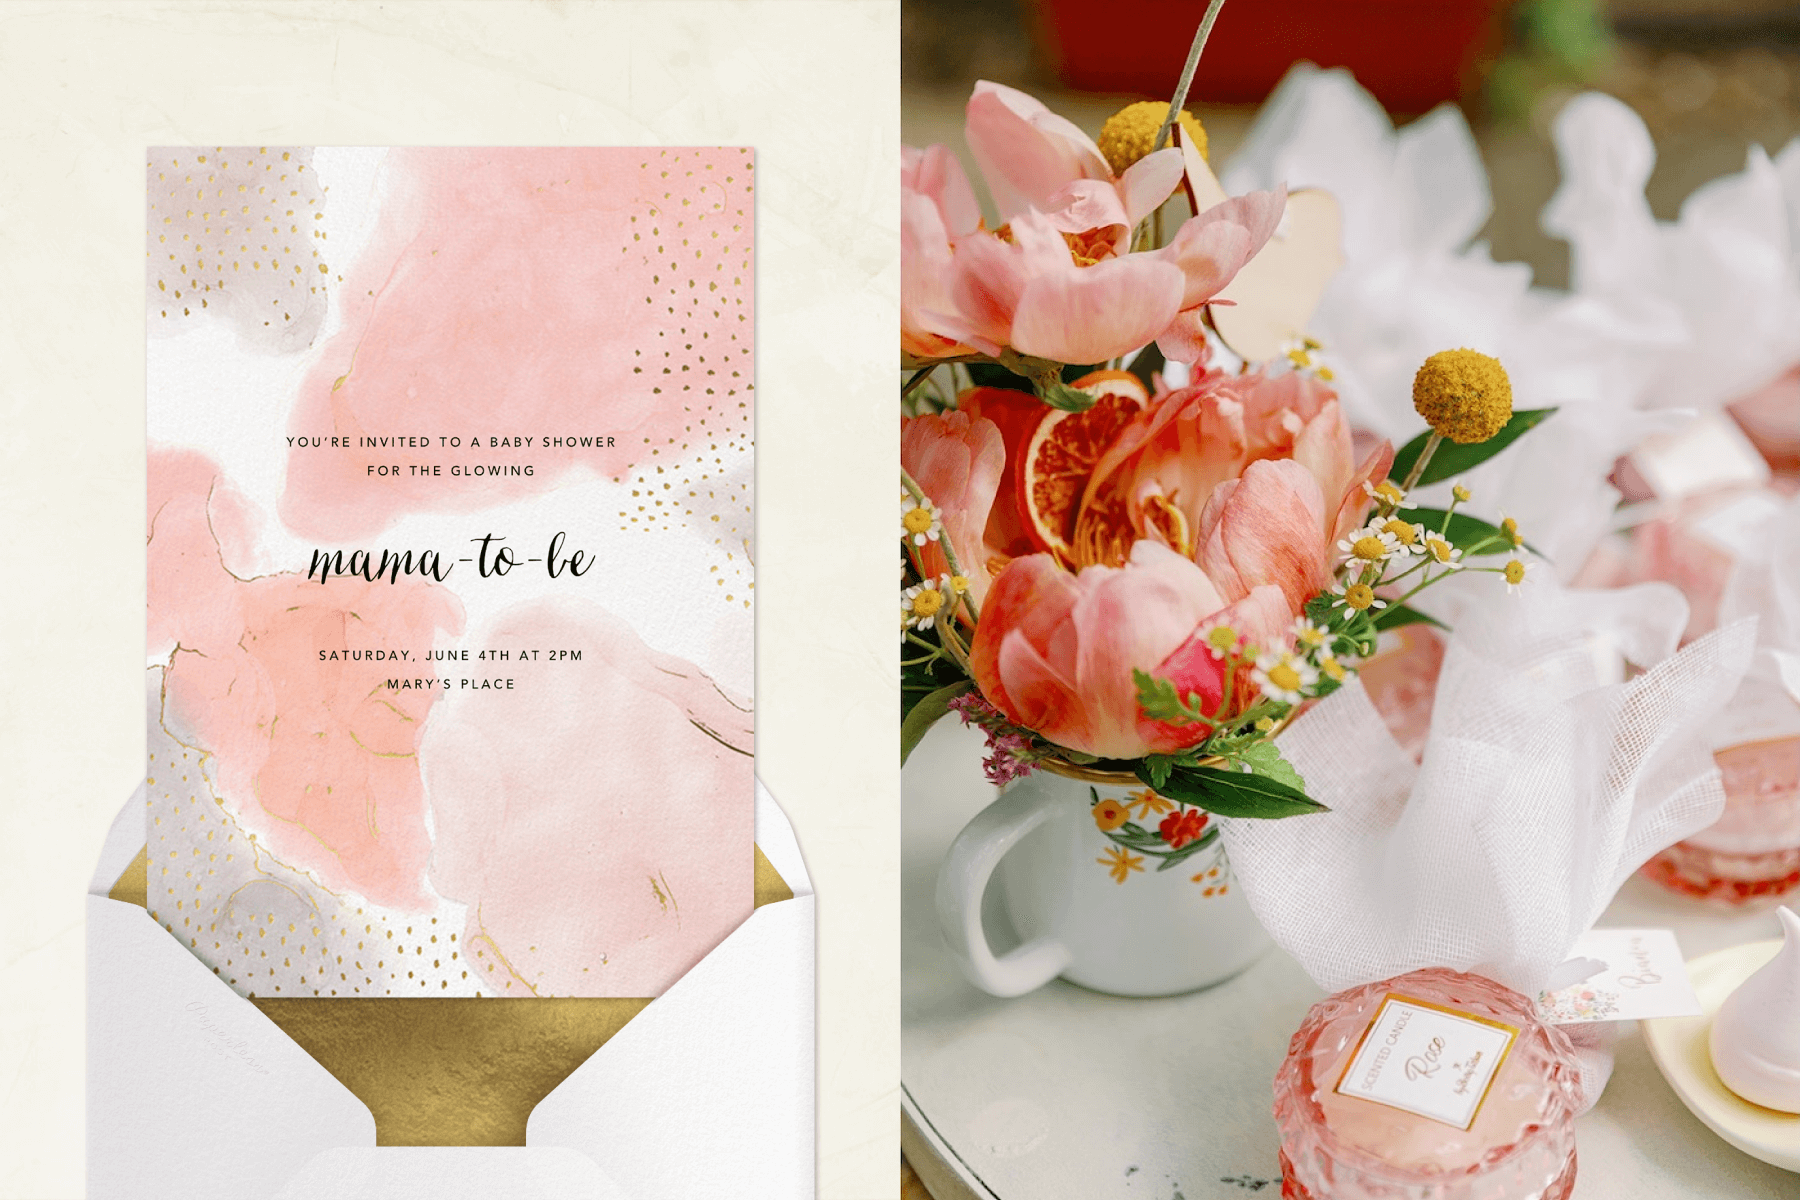 Left: A baby shower invitation with pink watercolor abstract shapes and gold flecks. Right: Pink flowers in a white coffee mug surrounded by white ribbon-wrapped favors.